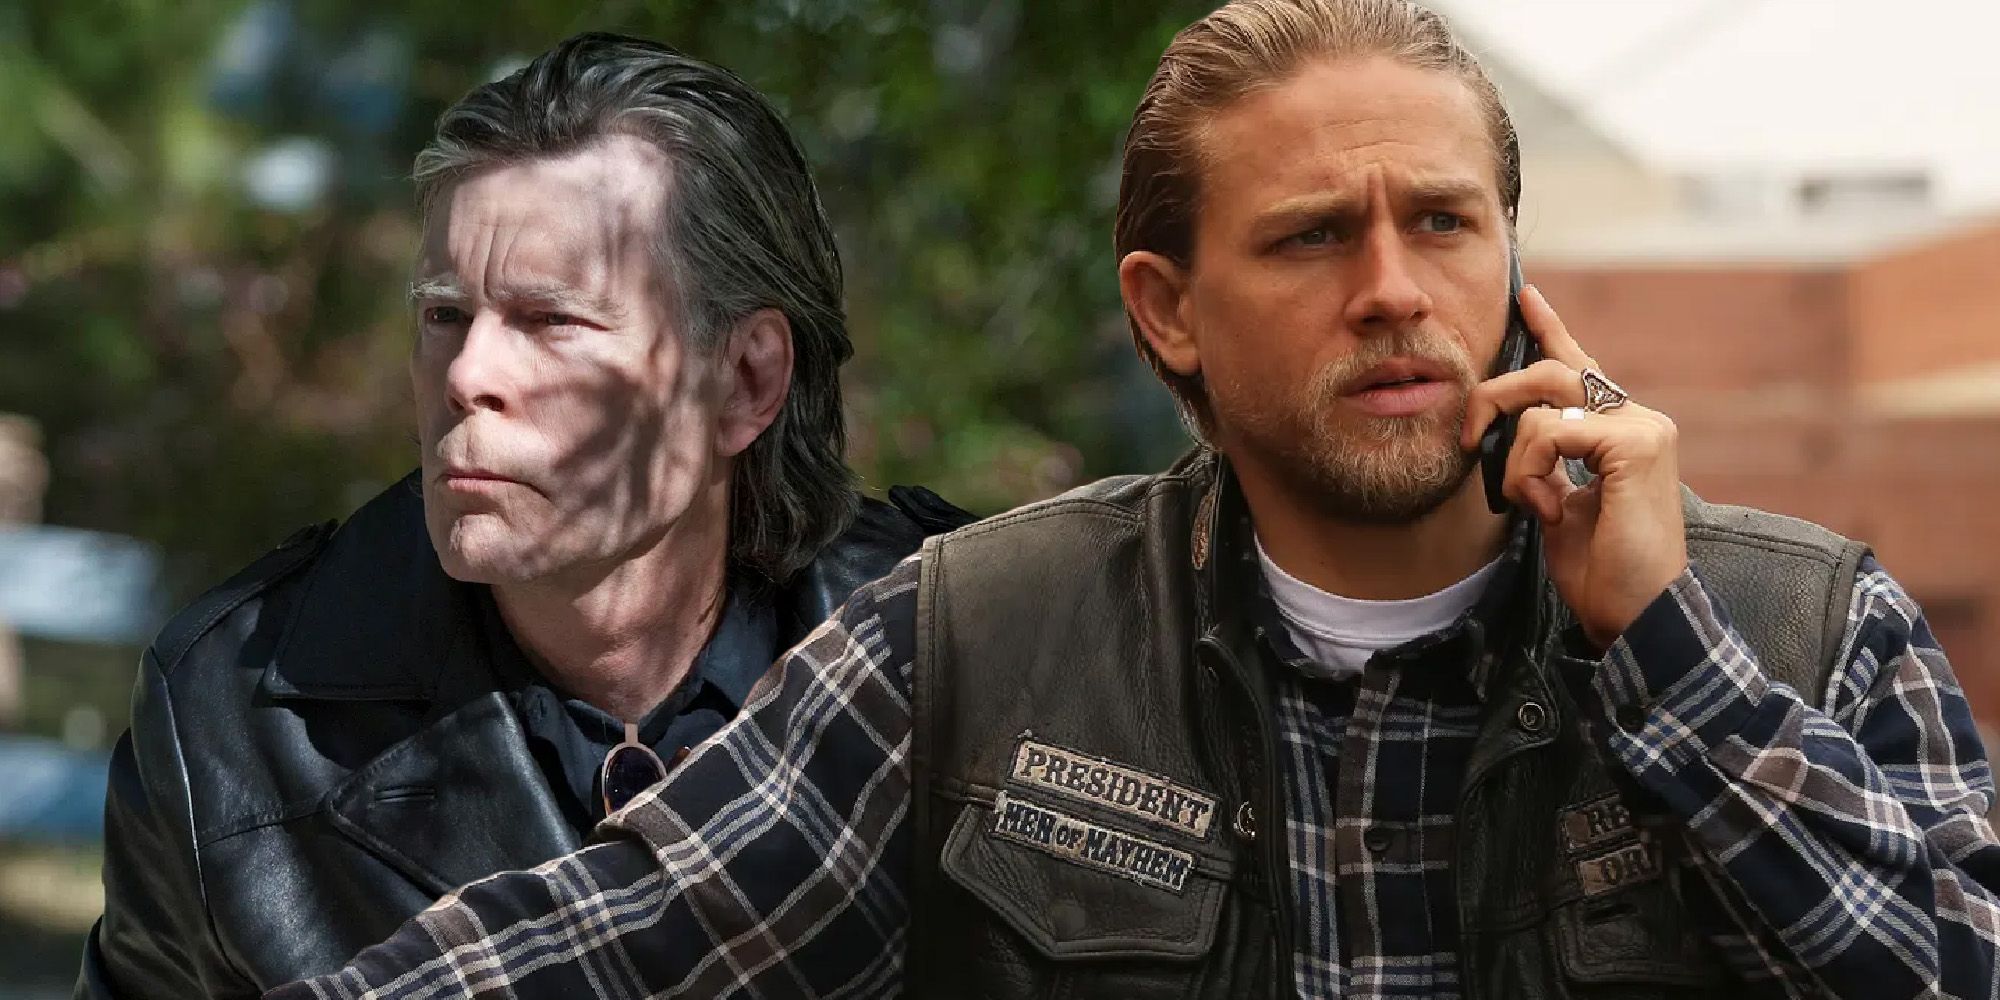 Sons of anarchy Stephen King